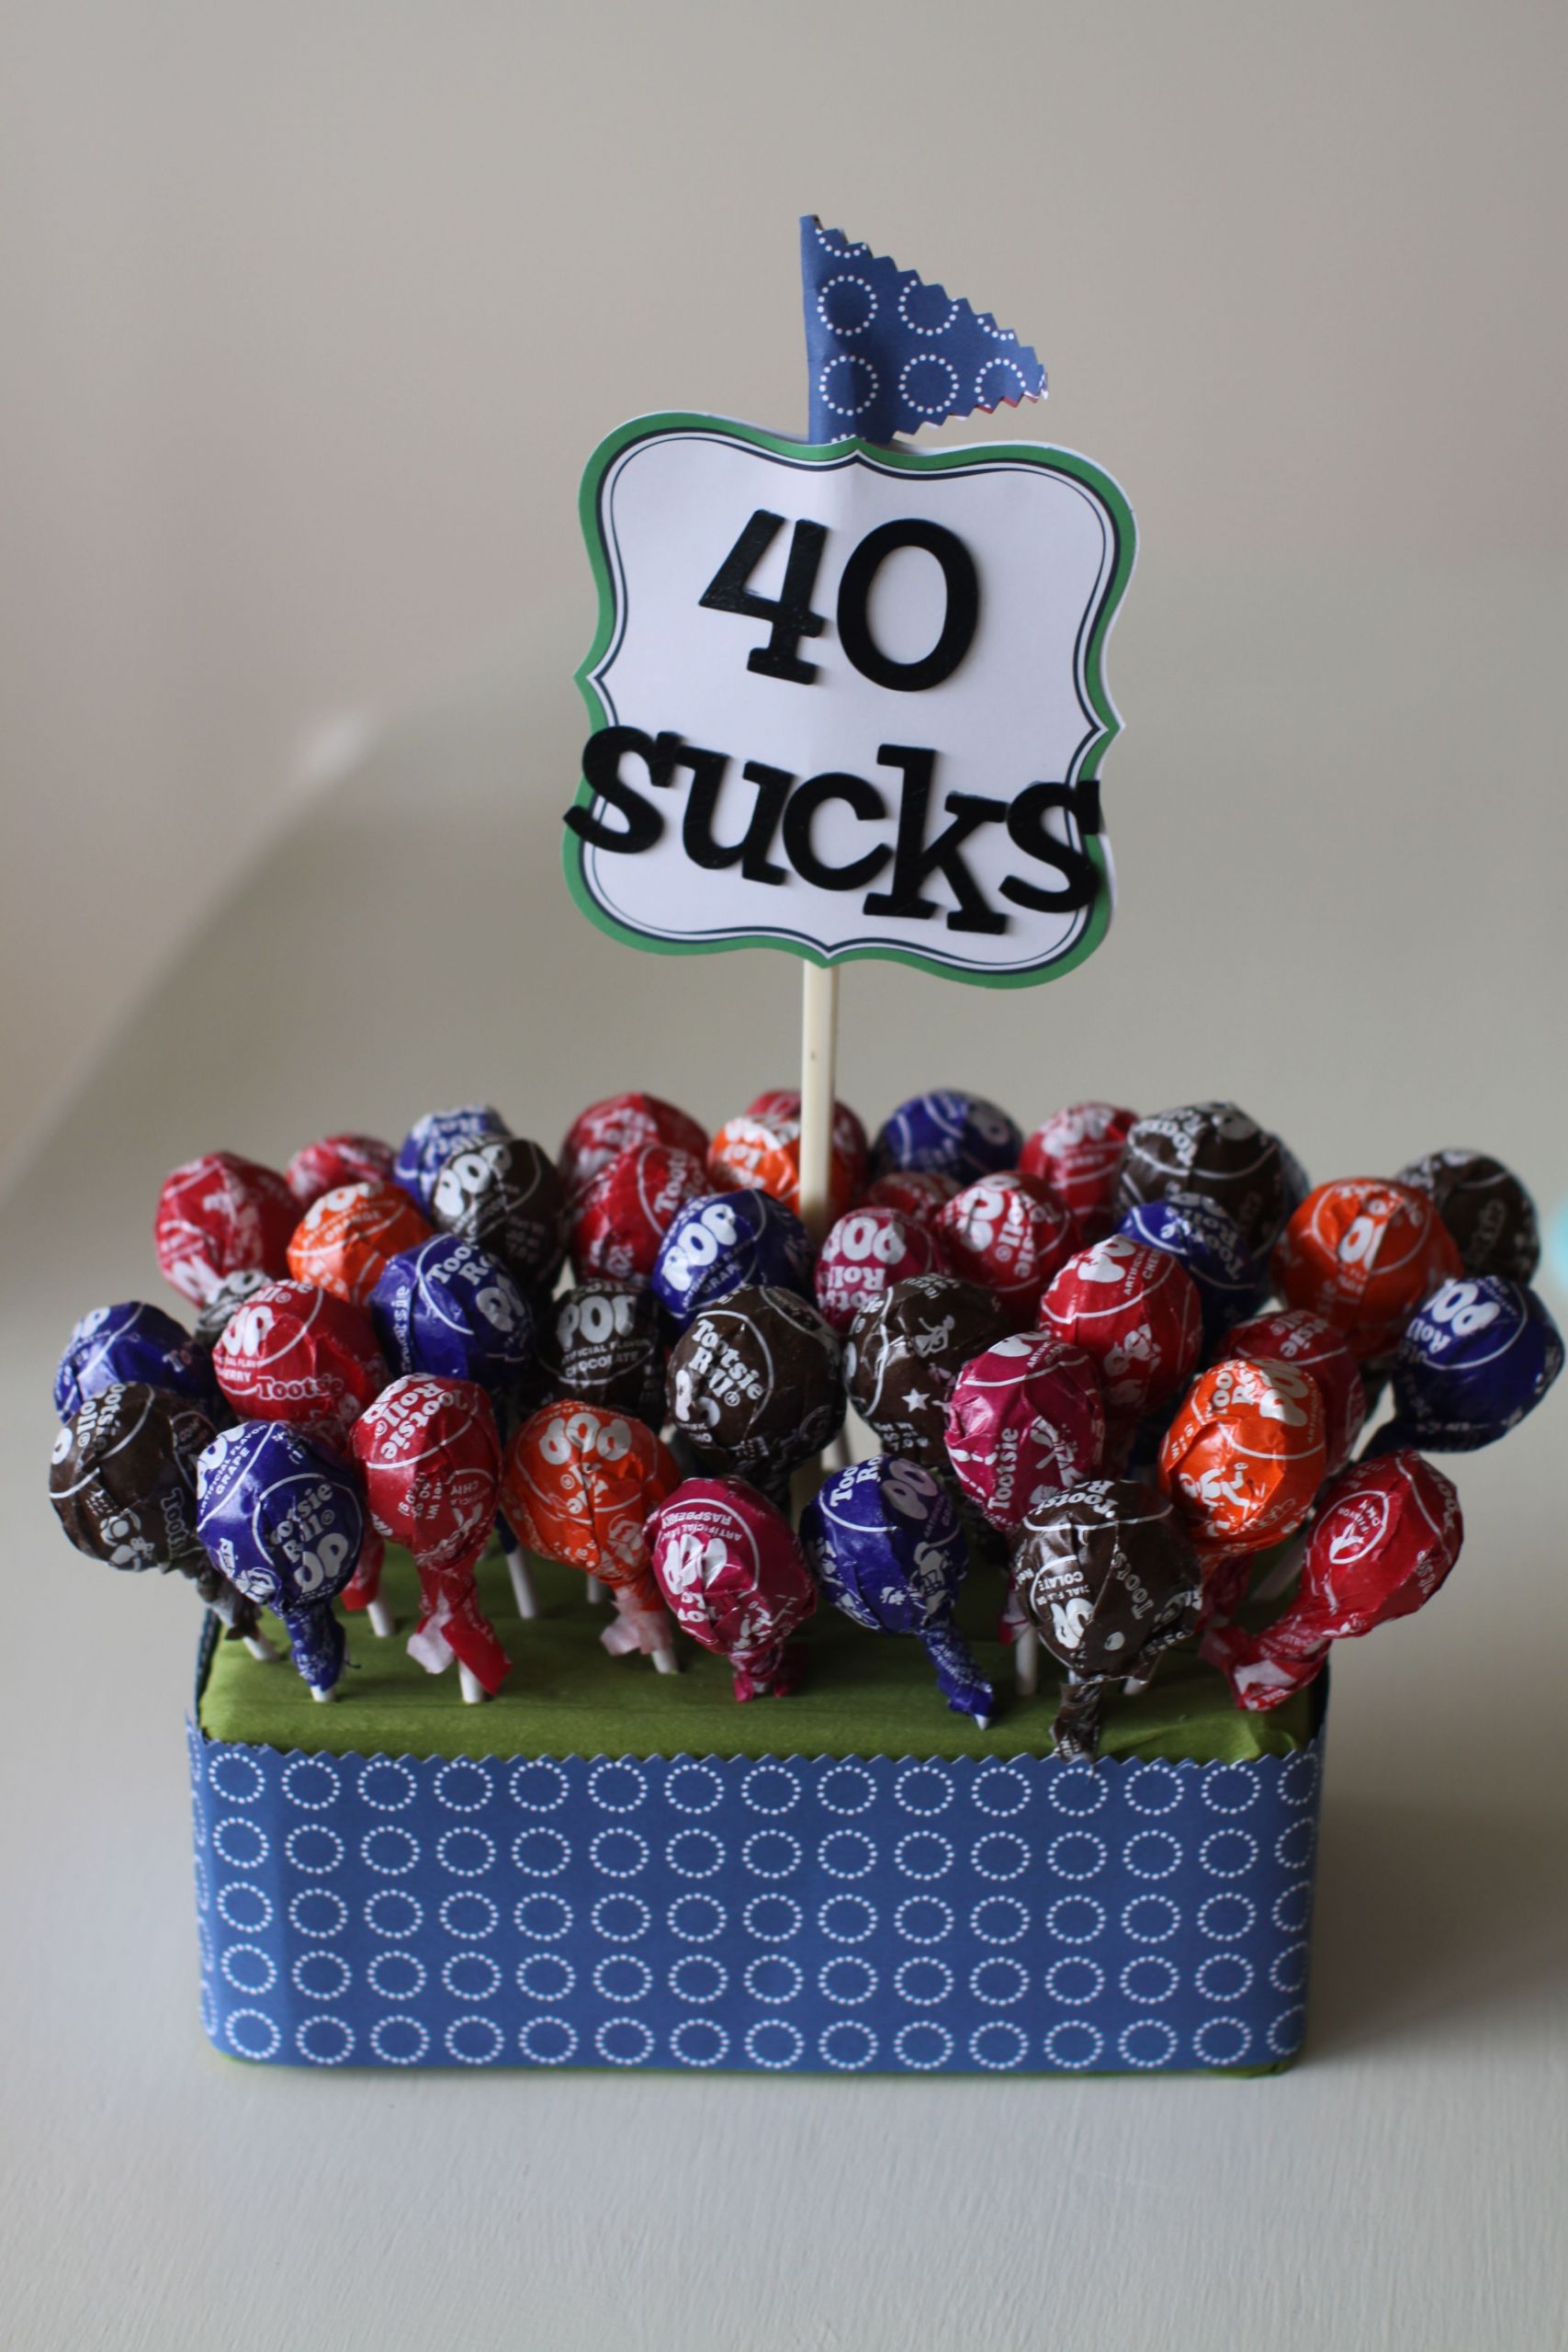 40 Birthday Gifts
 Cute idea for 40th birthday t ough 40 does NOT